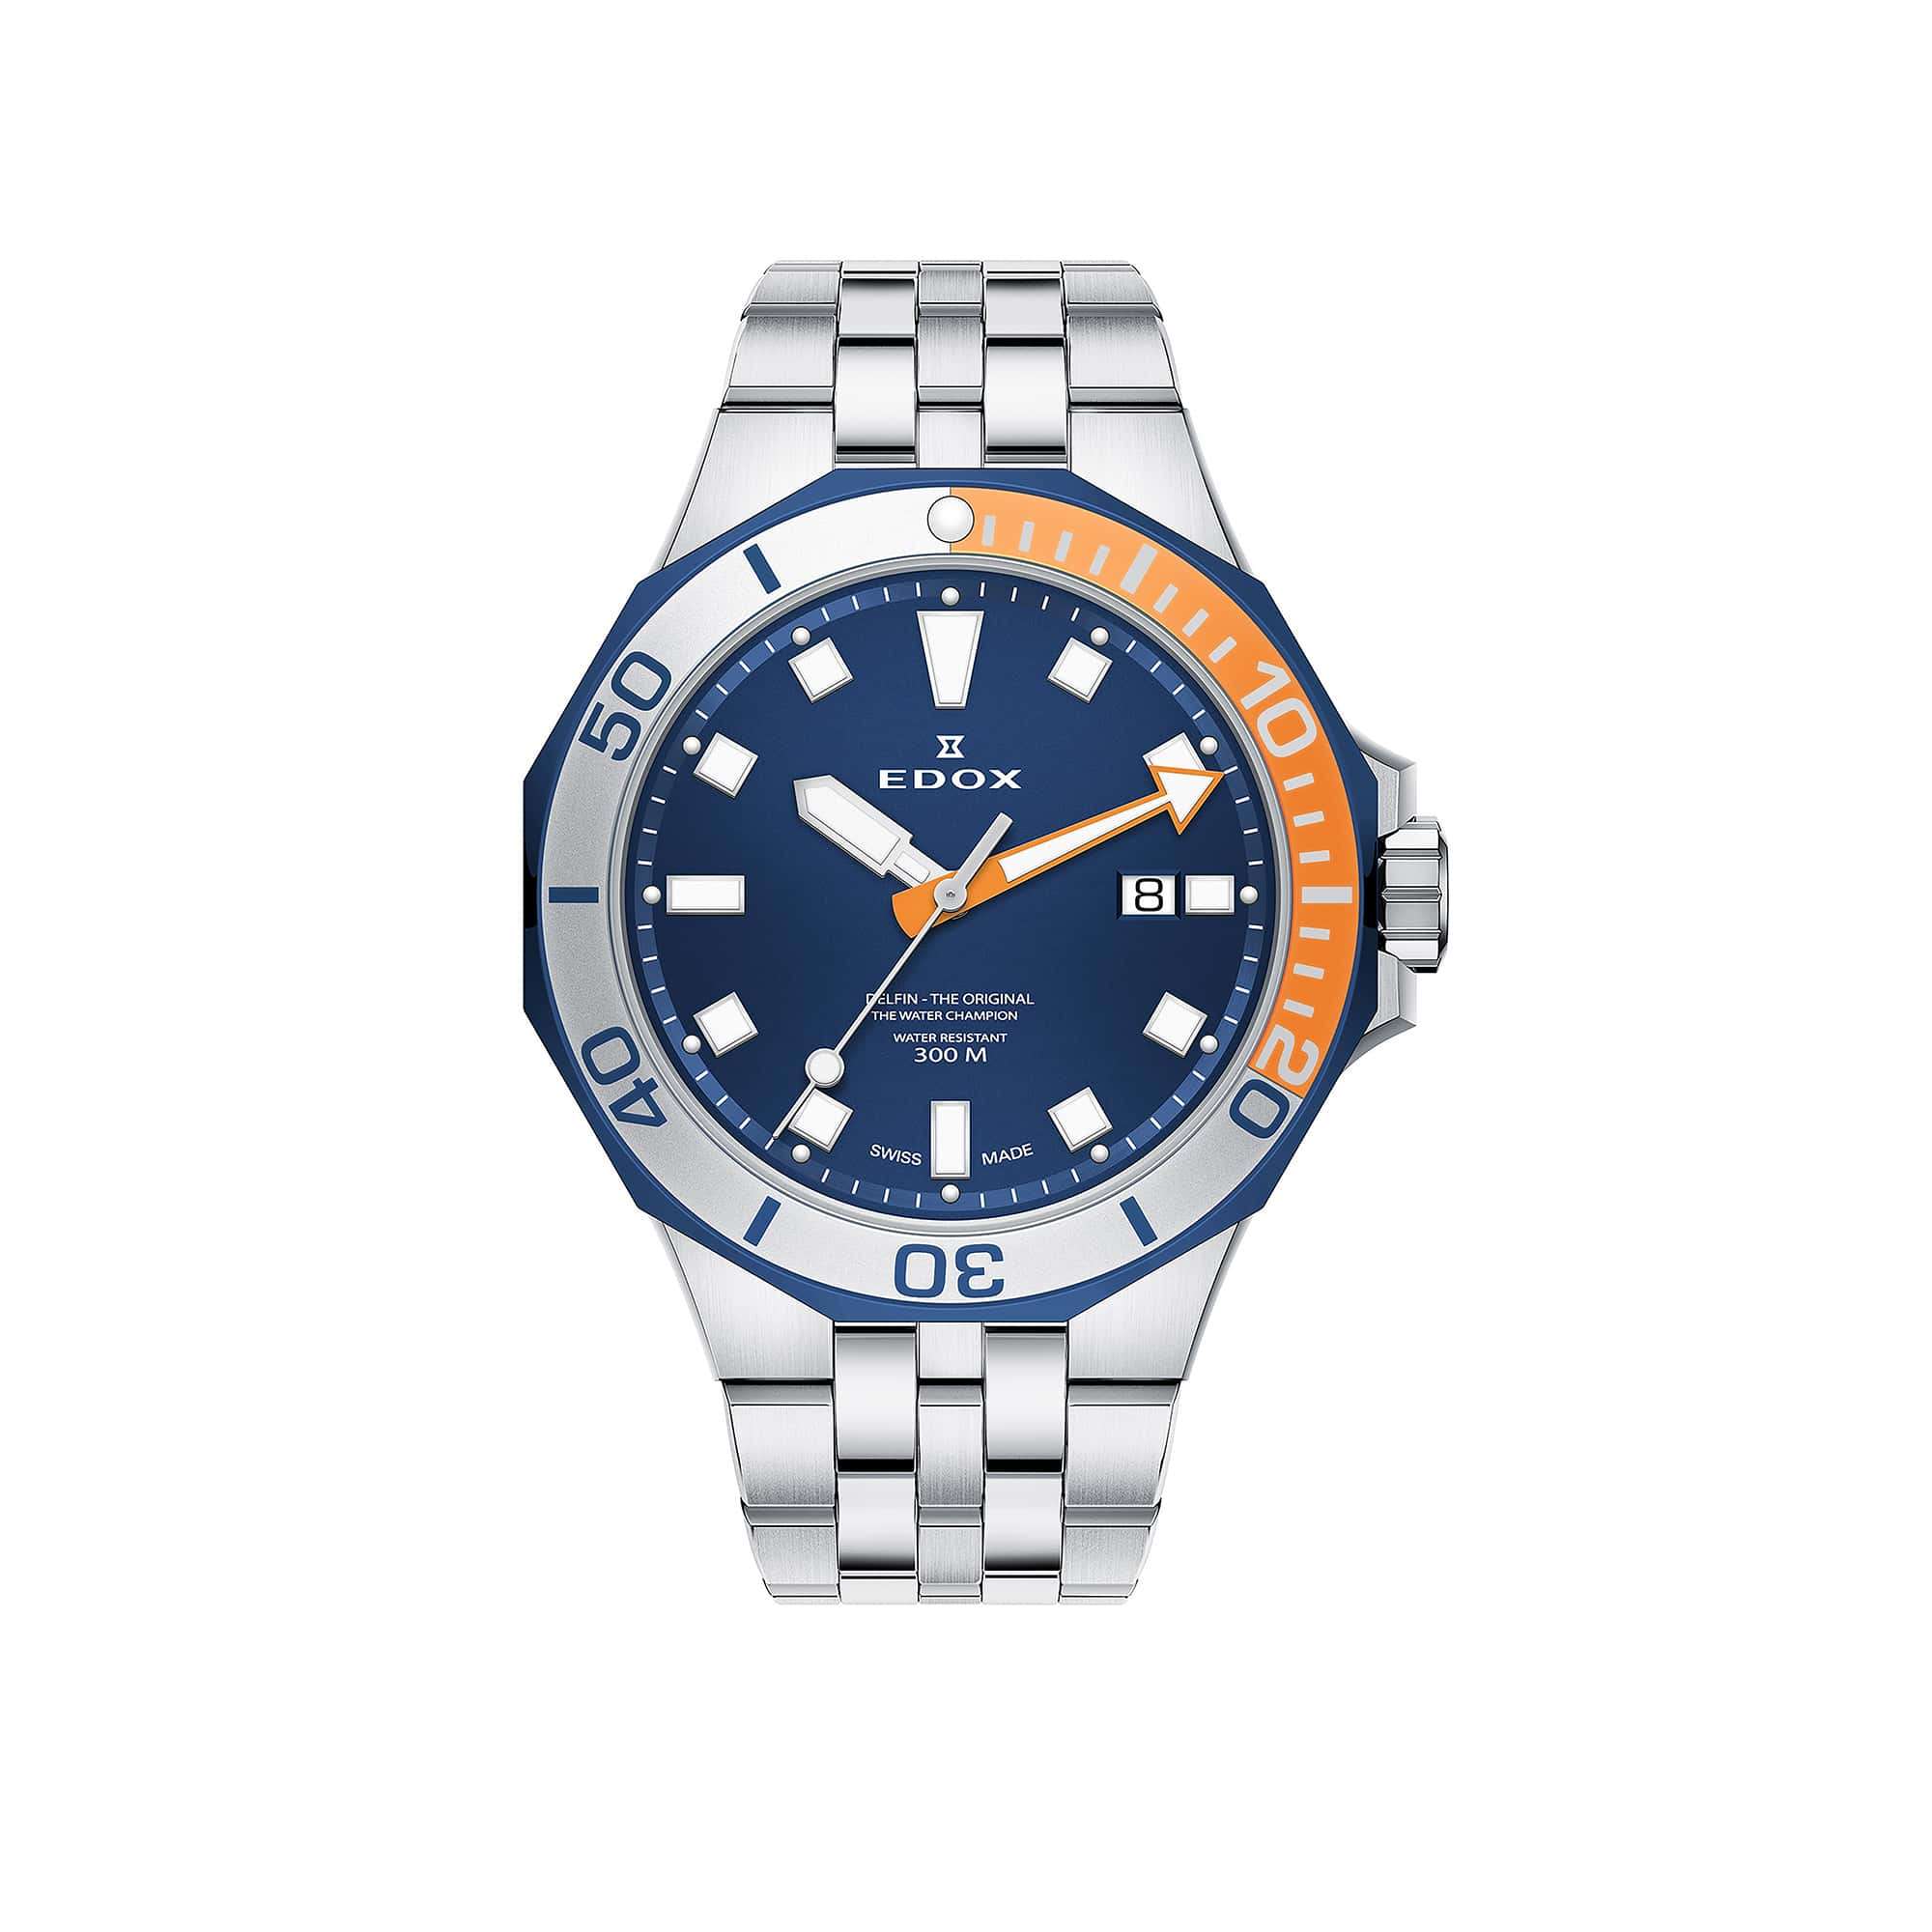 Edox Delfin Diver Date 53015-357BUOM-BUIN – Swiss Time